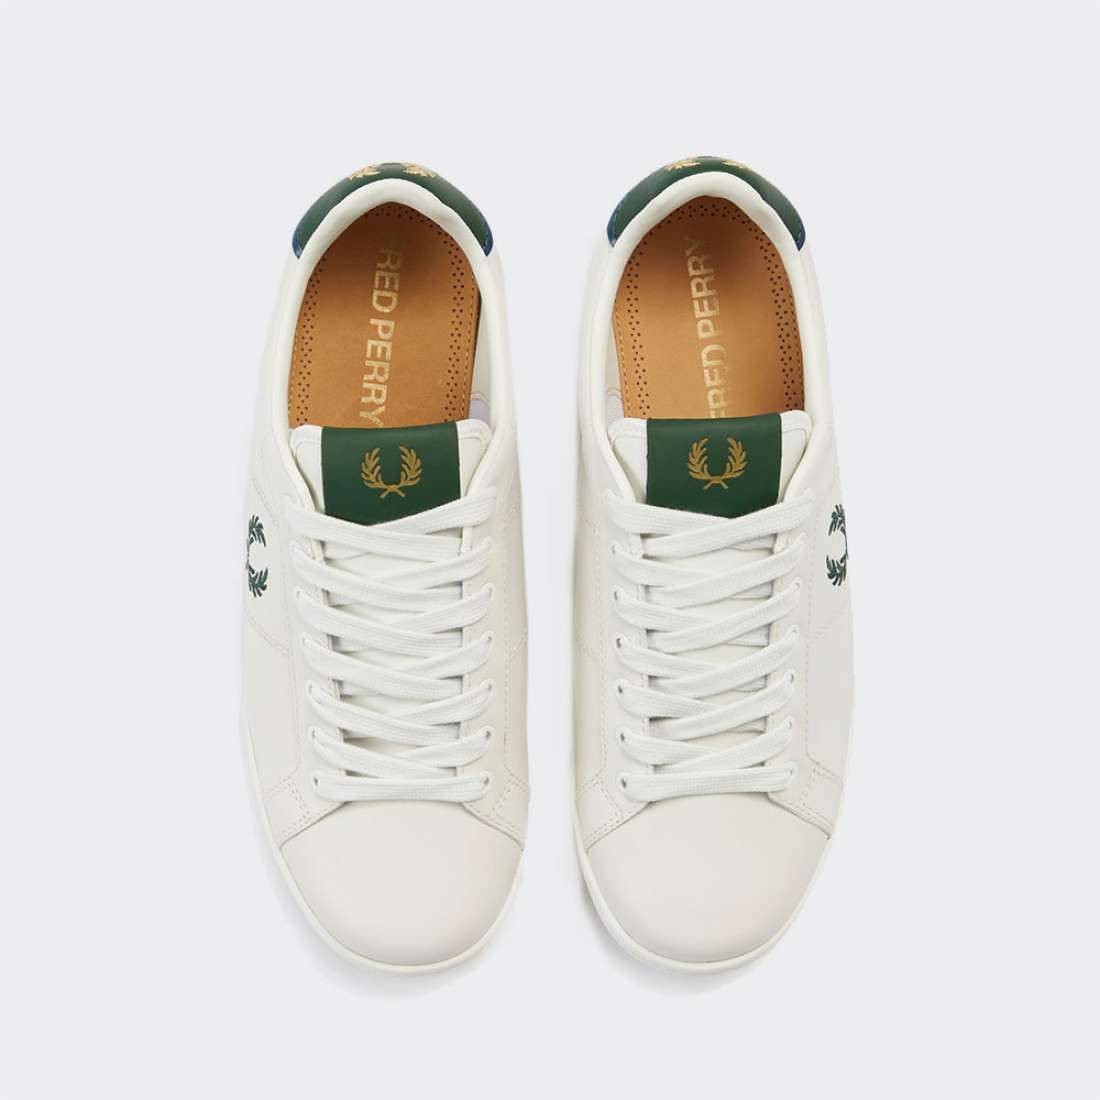 FRED PERRY B722 172